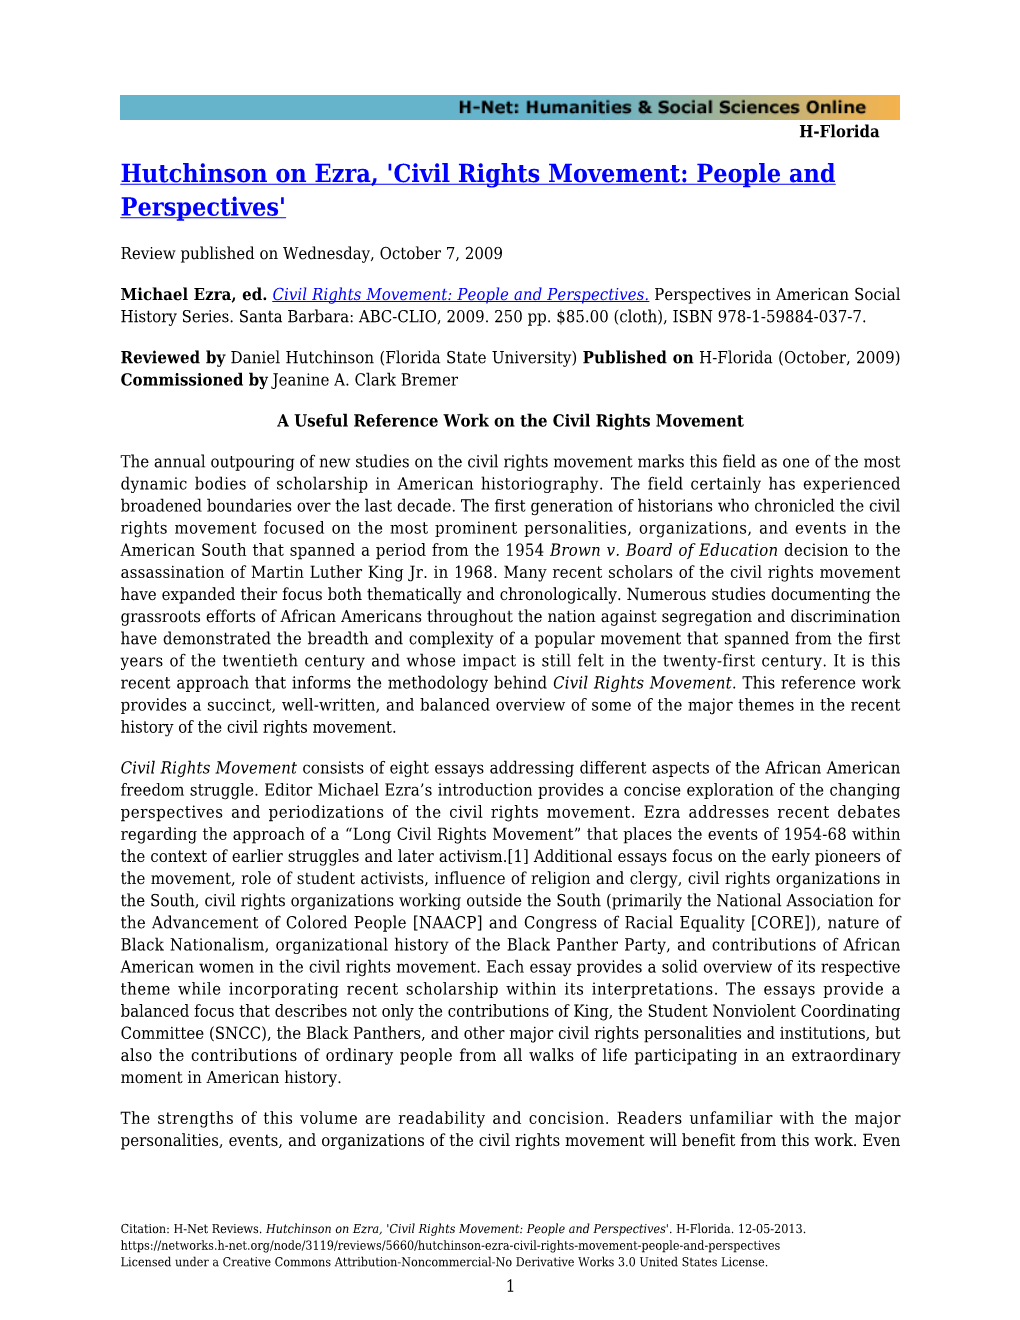 Hutchinson on Ezra, 'Civil Rights Movement: People and Perspectives'